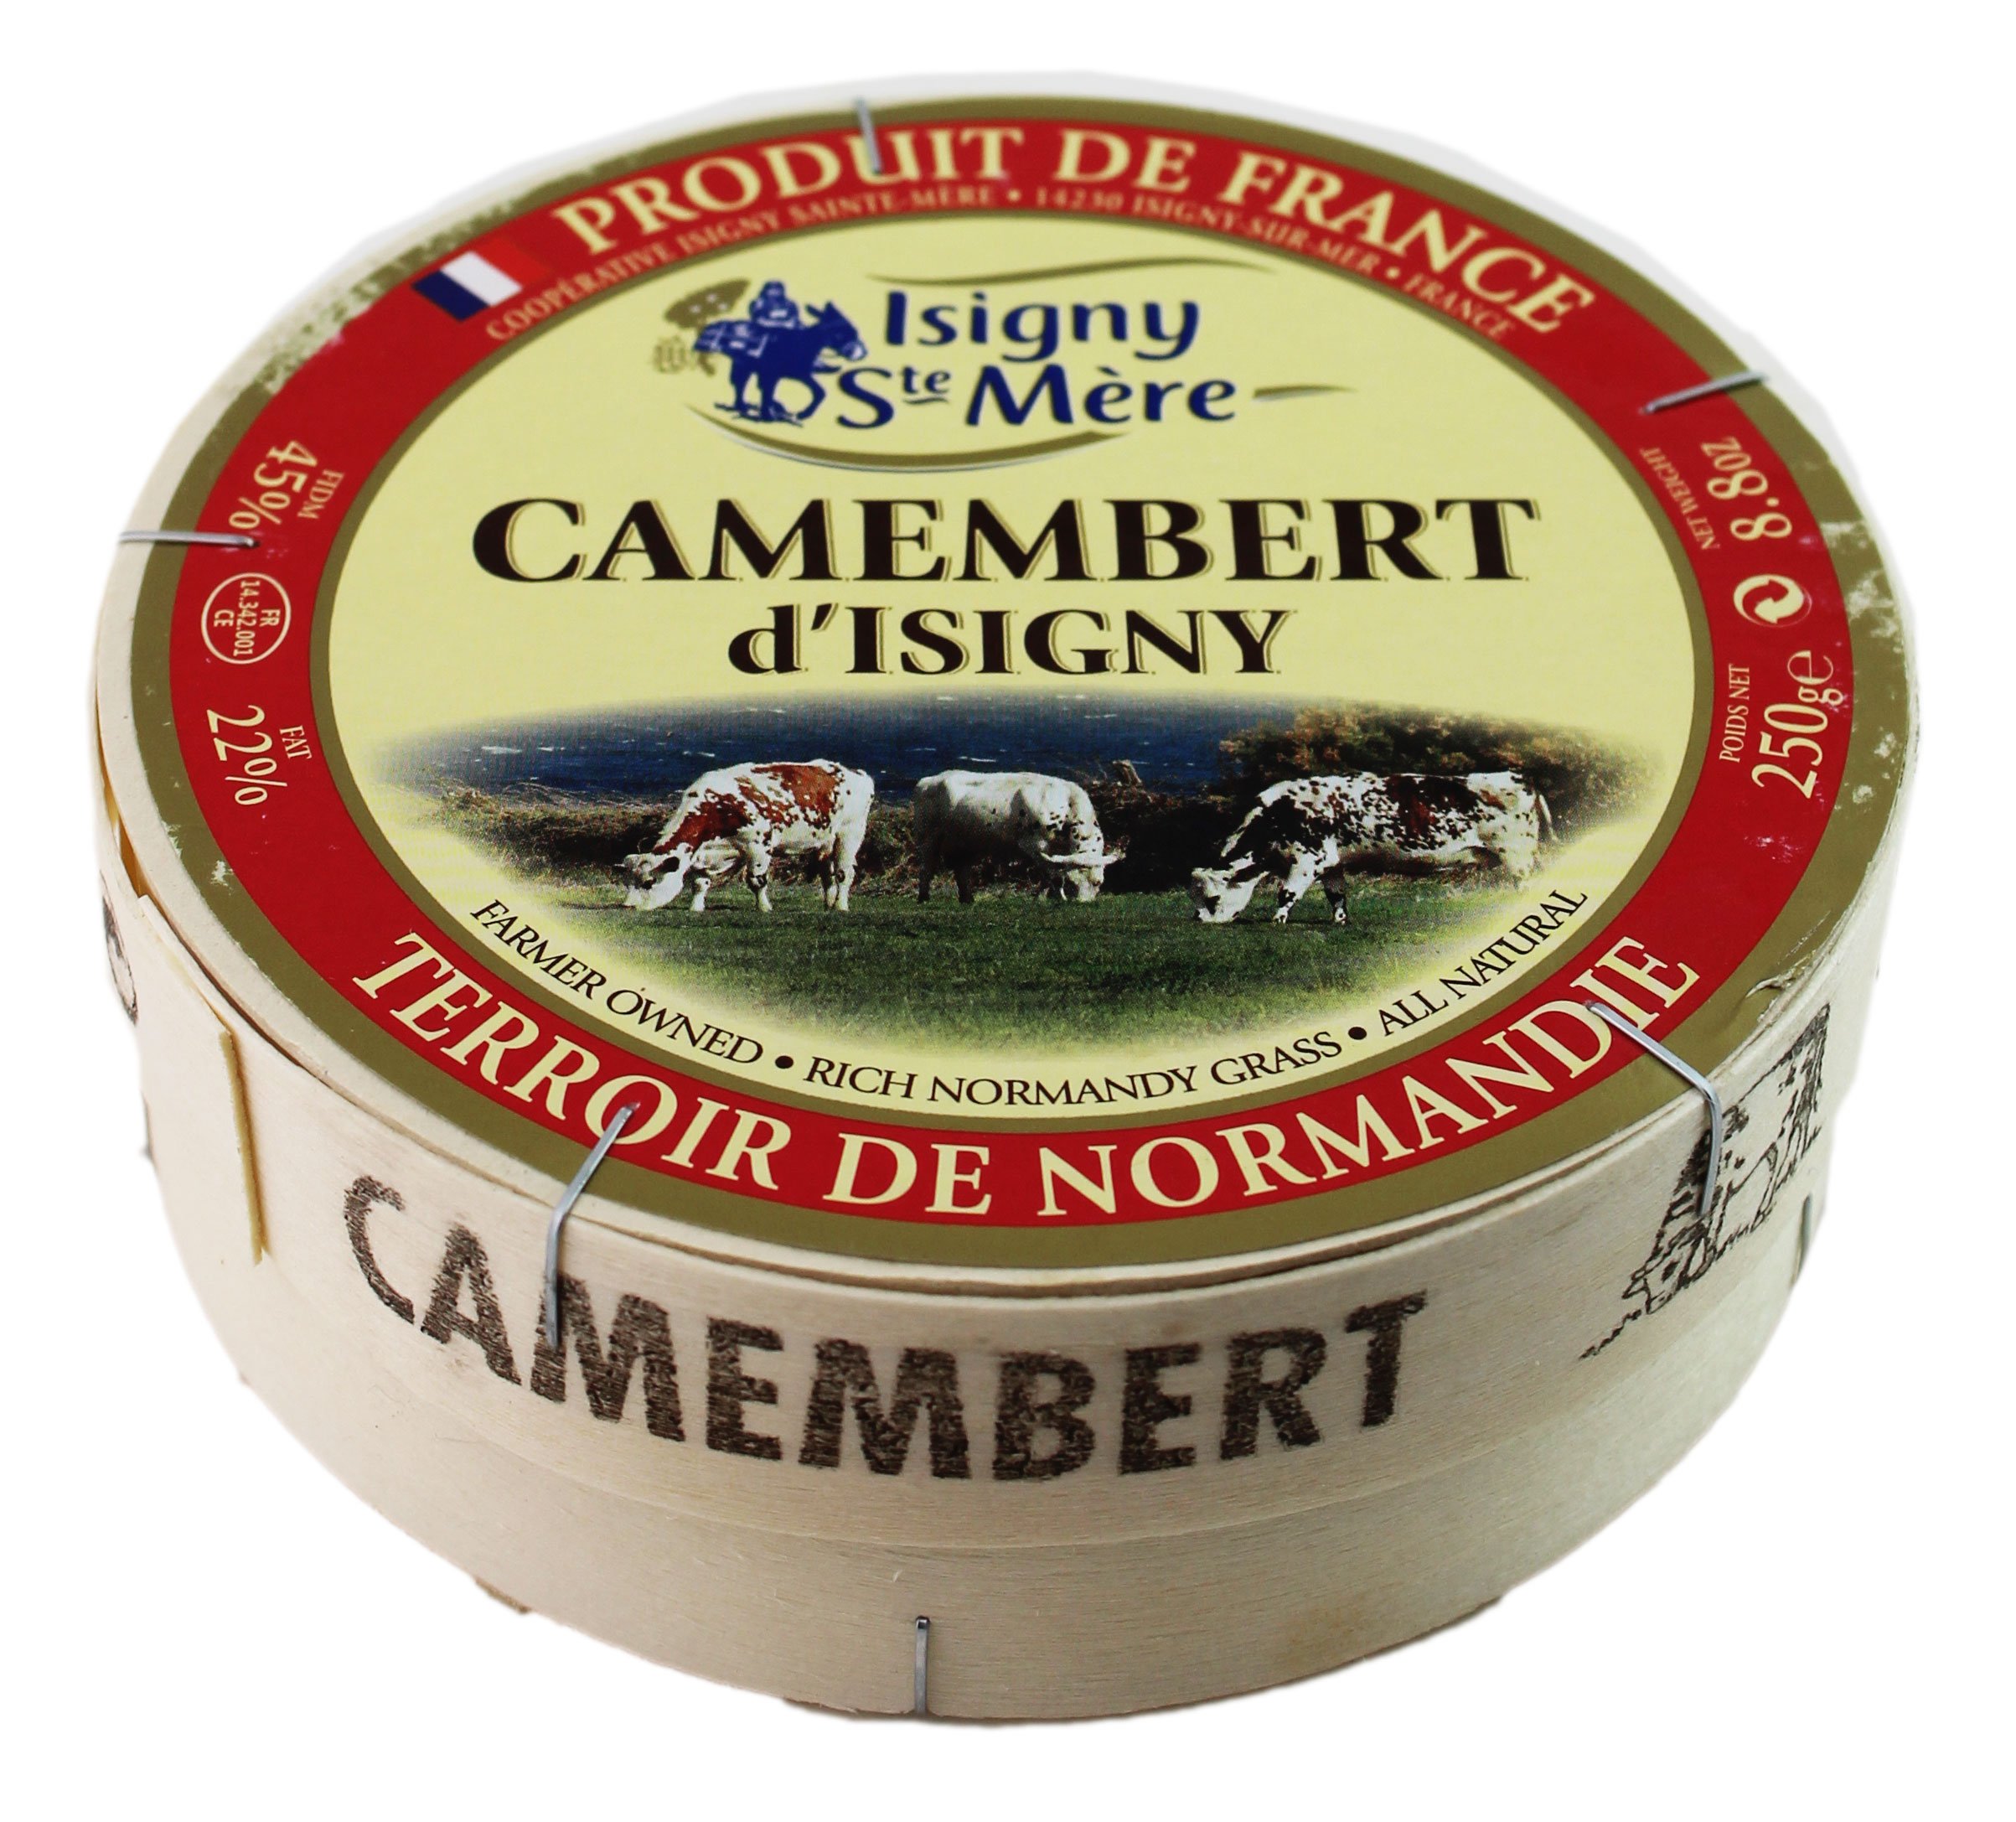 Isigny Ste Mere Camembert Disigny Shop Cheese At H E B 